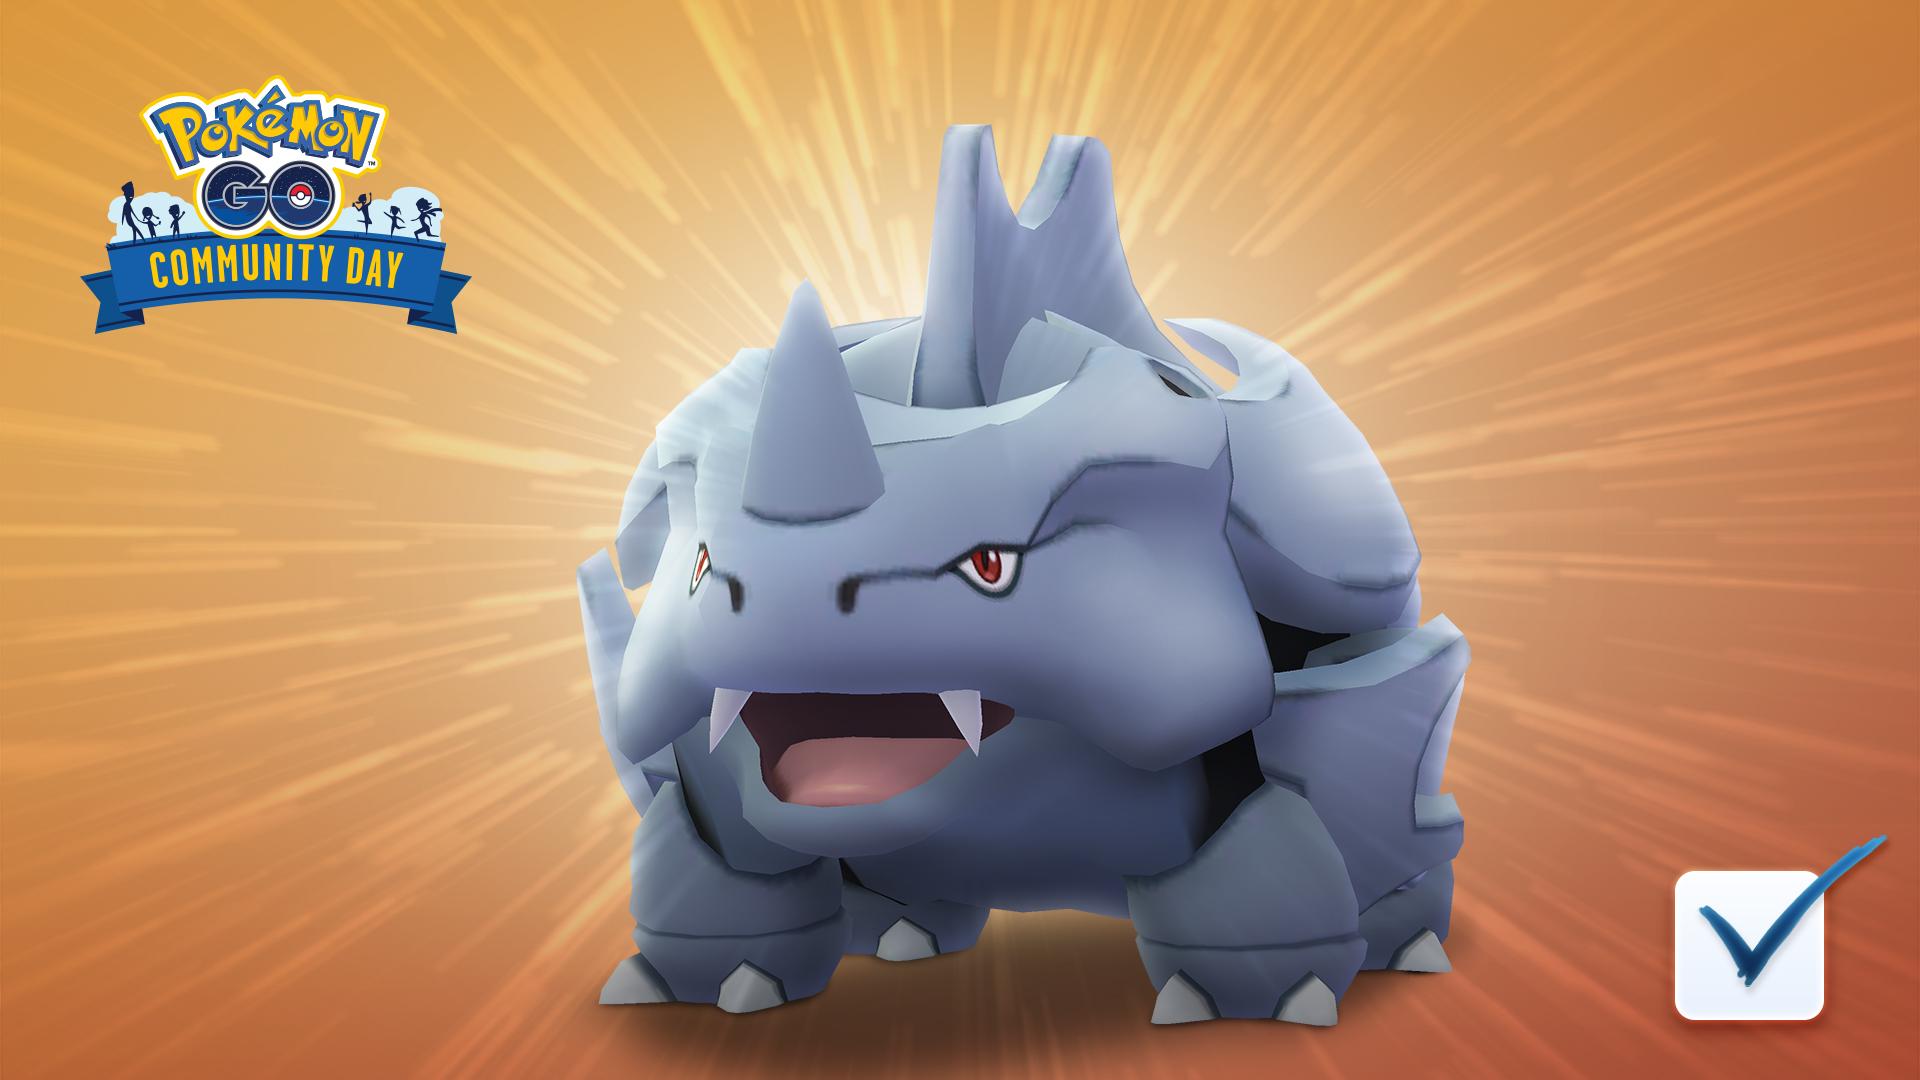 Pokémon Go's first voting experiment results in Rhyhorn Community Day